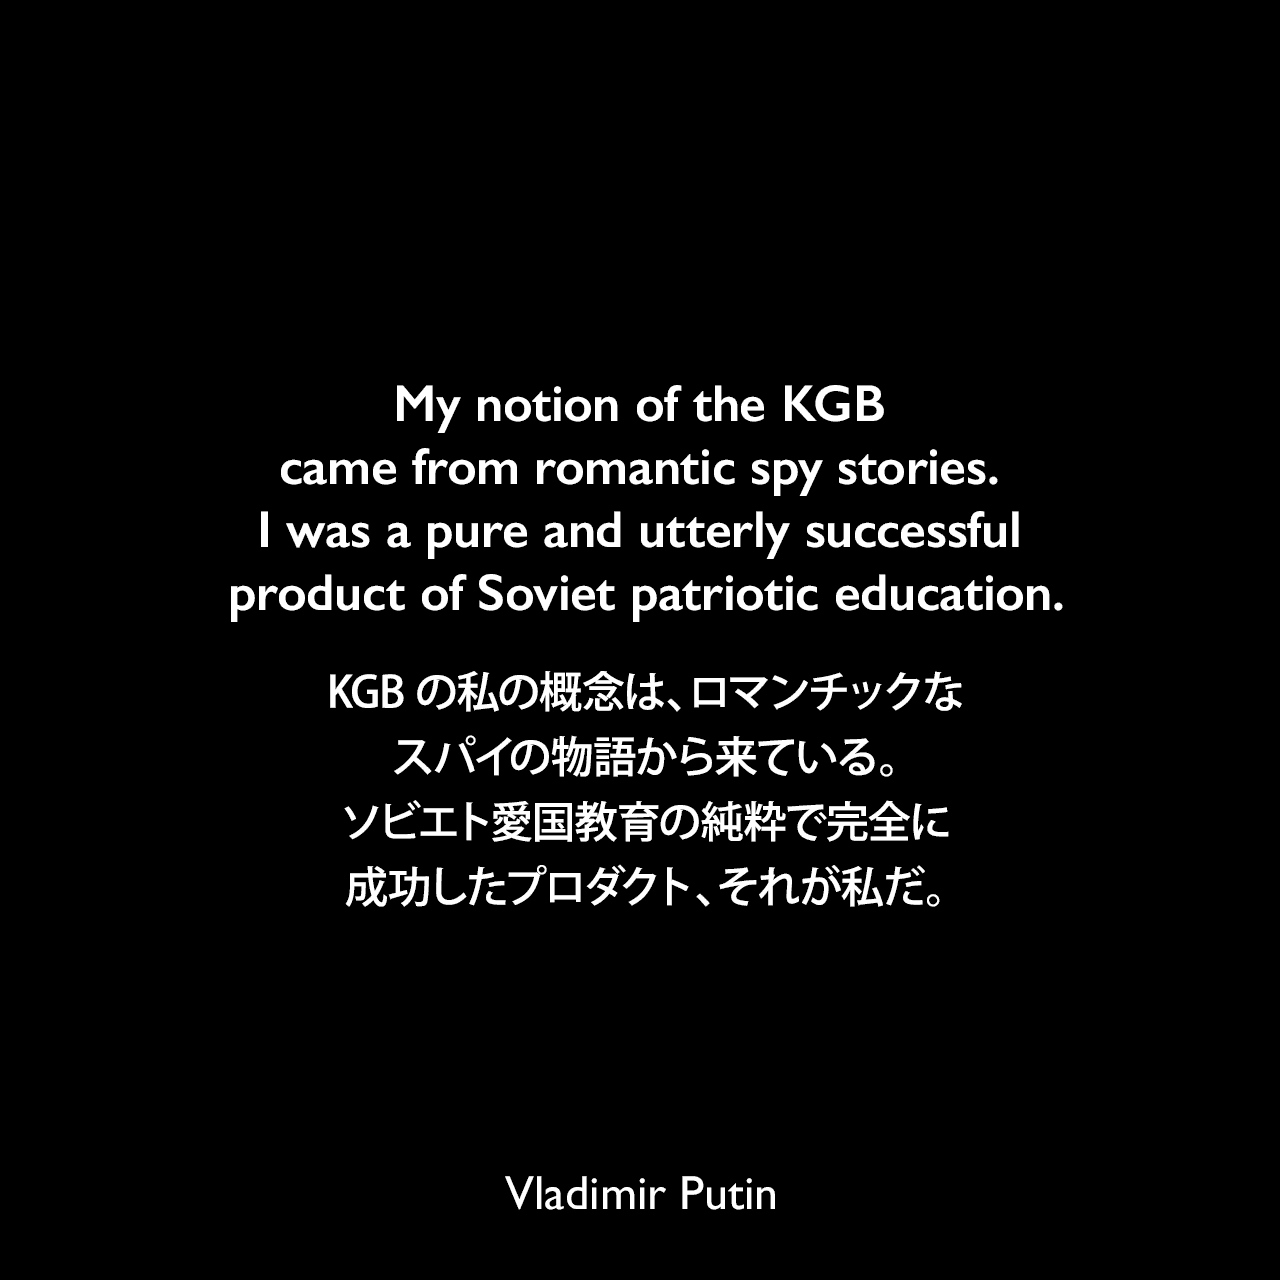 My notion of the KGB came from romantic spy stories. I was a pure and utterly successful product of Soviet patriotic education.KGBの私の概念は、ロマンチックなスパイの物語から来ている。ソビエト愛国教育の純粋で完全に成功したプロダクト、それが私だ。Vladimir Putin